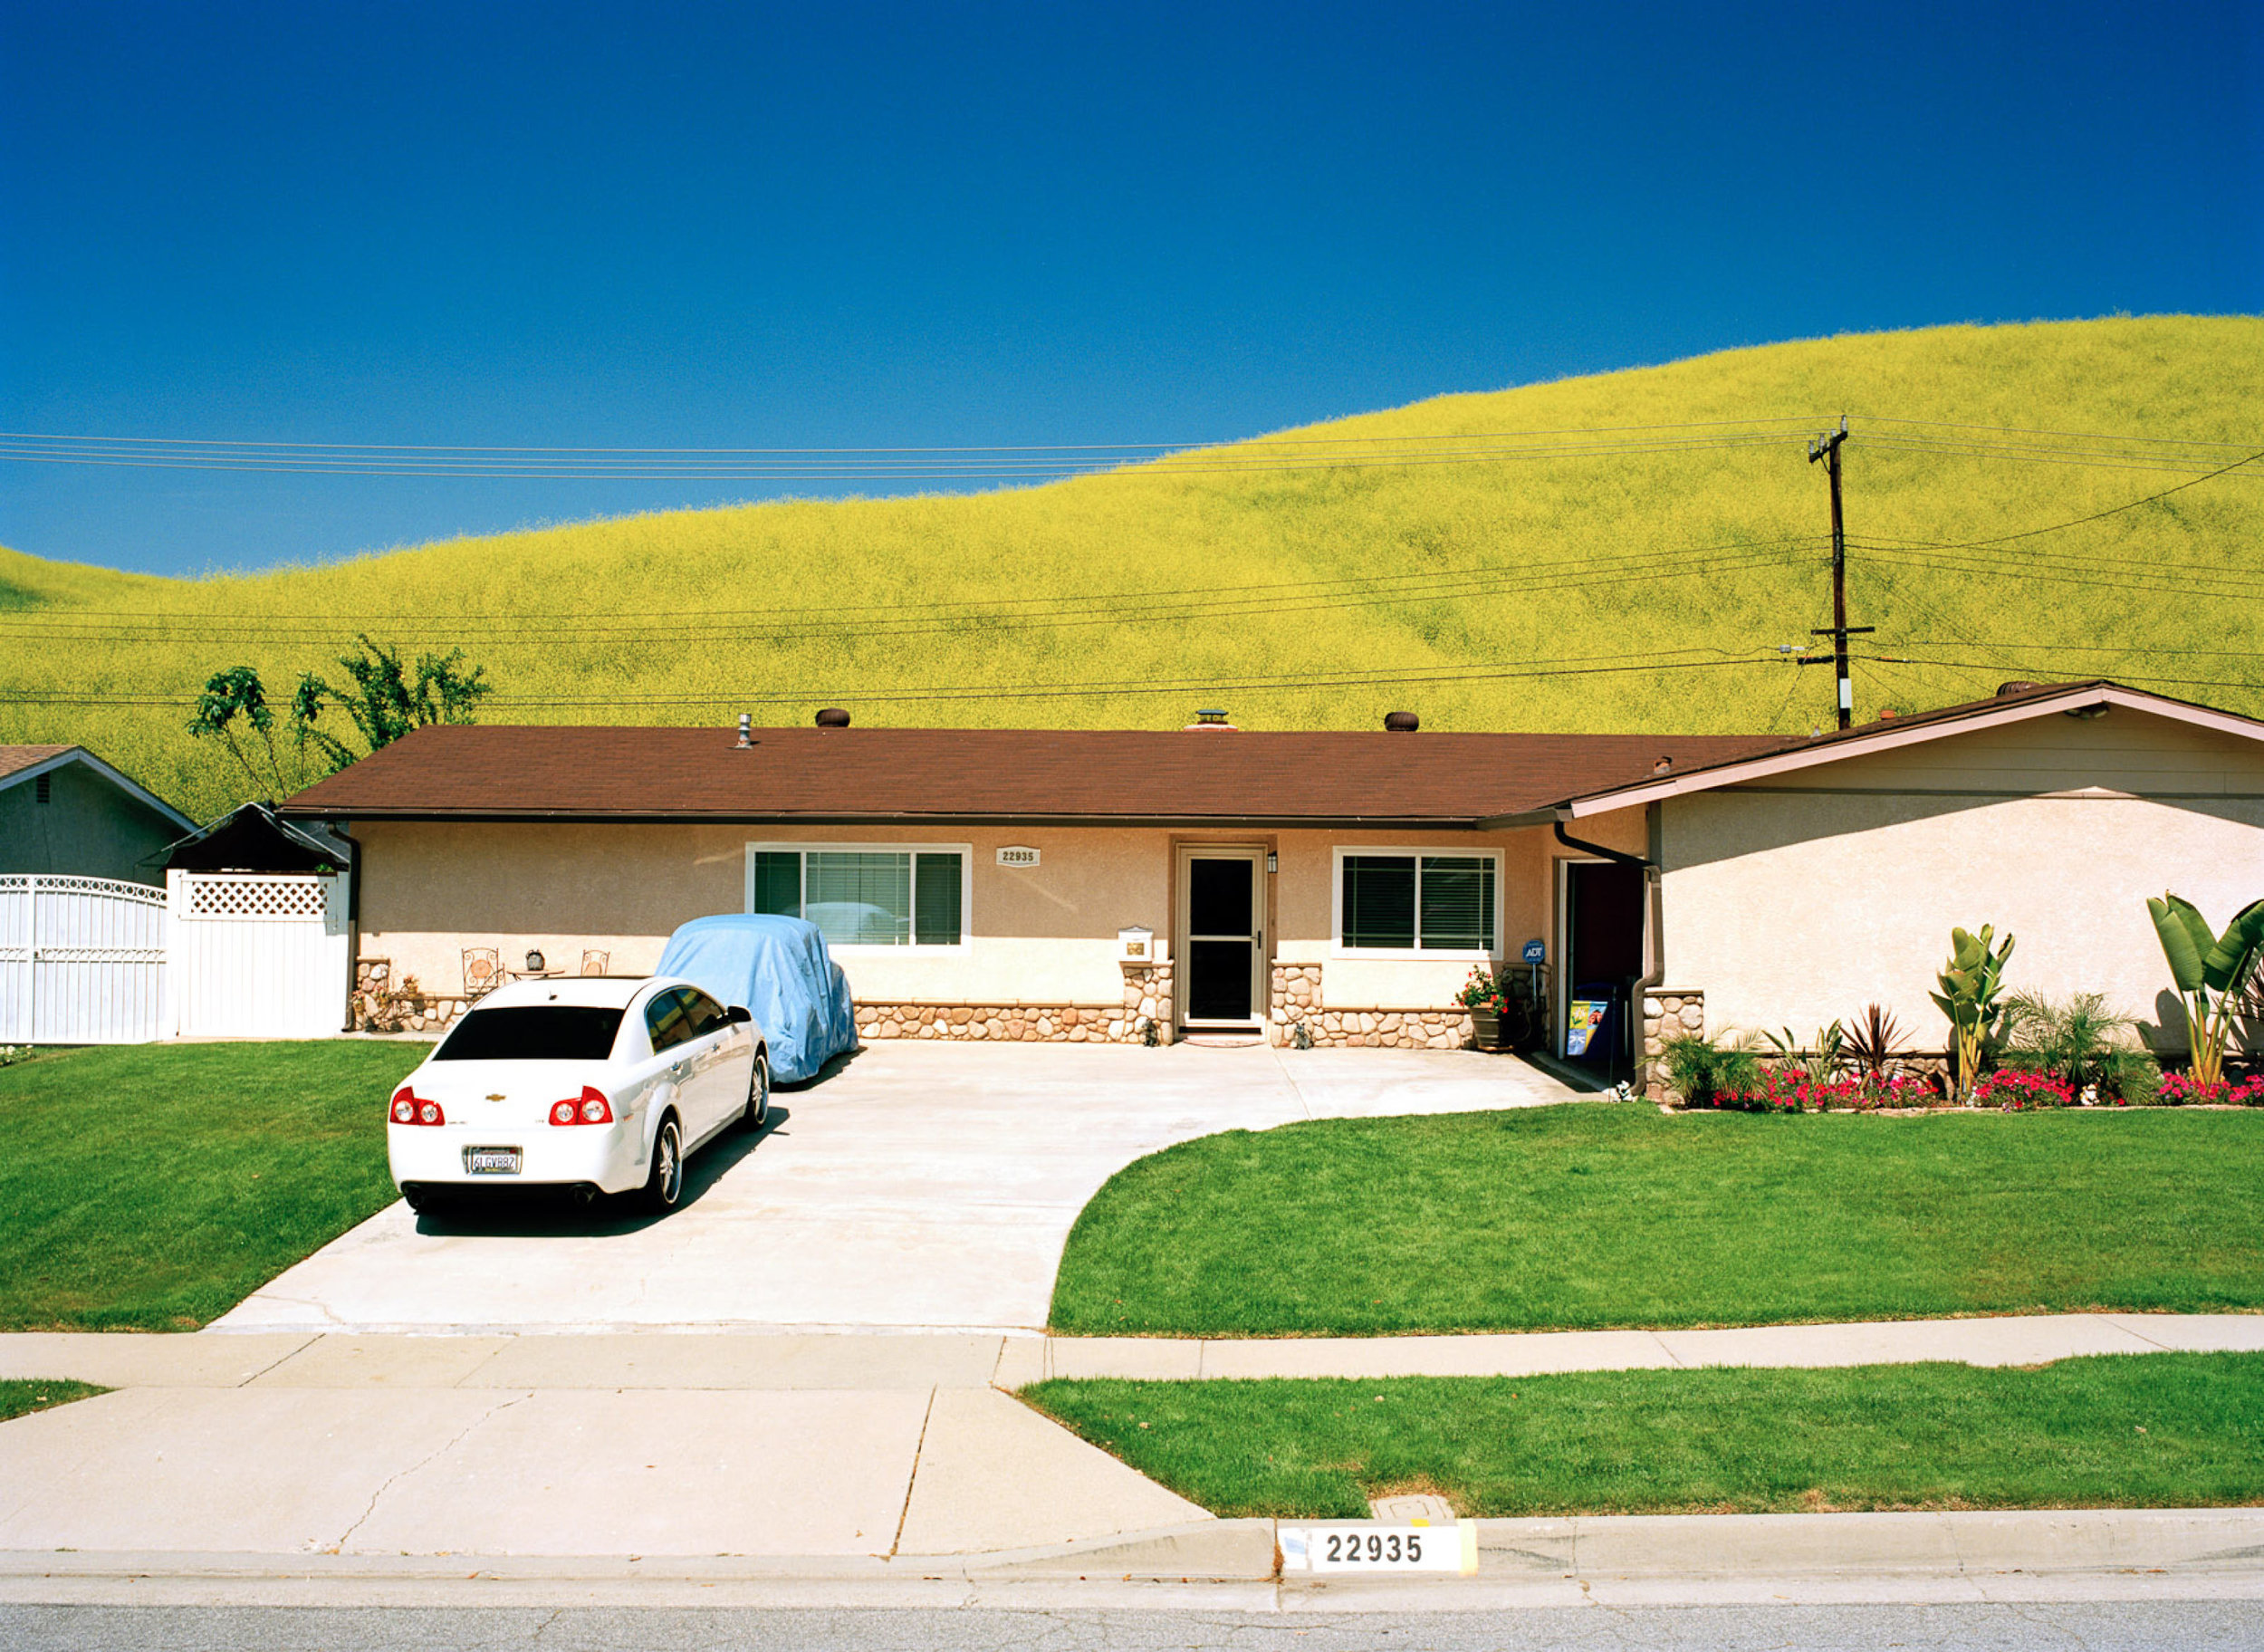   Utopia is an observation of the suburban neighborhoods I was raised in on the edge of Los Angeles County.  